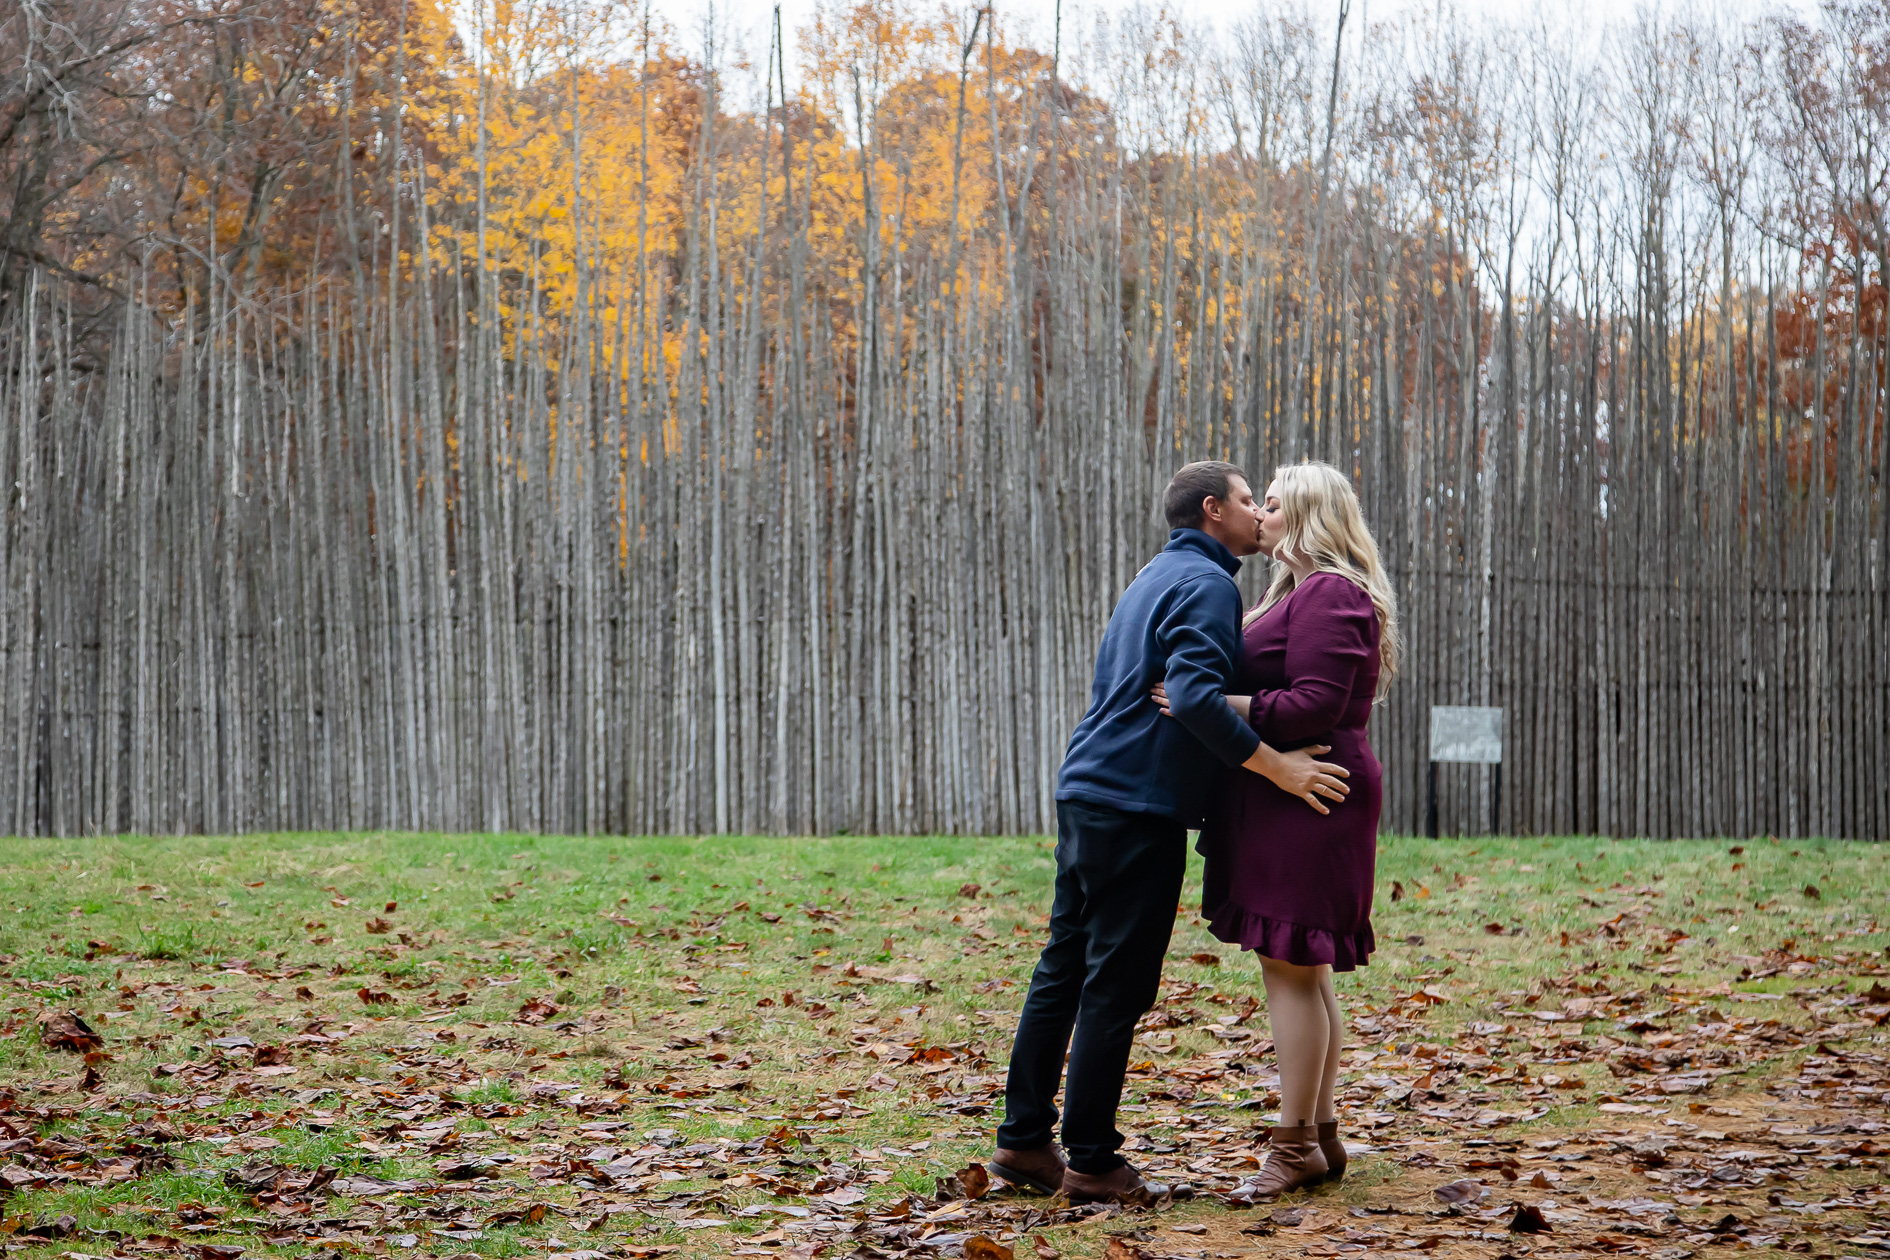 Engagement session Medway Forest London Ontario